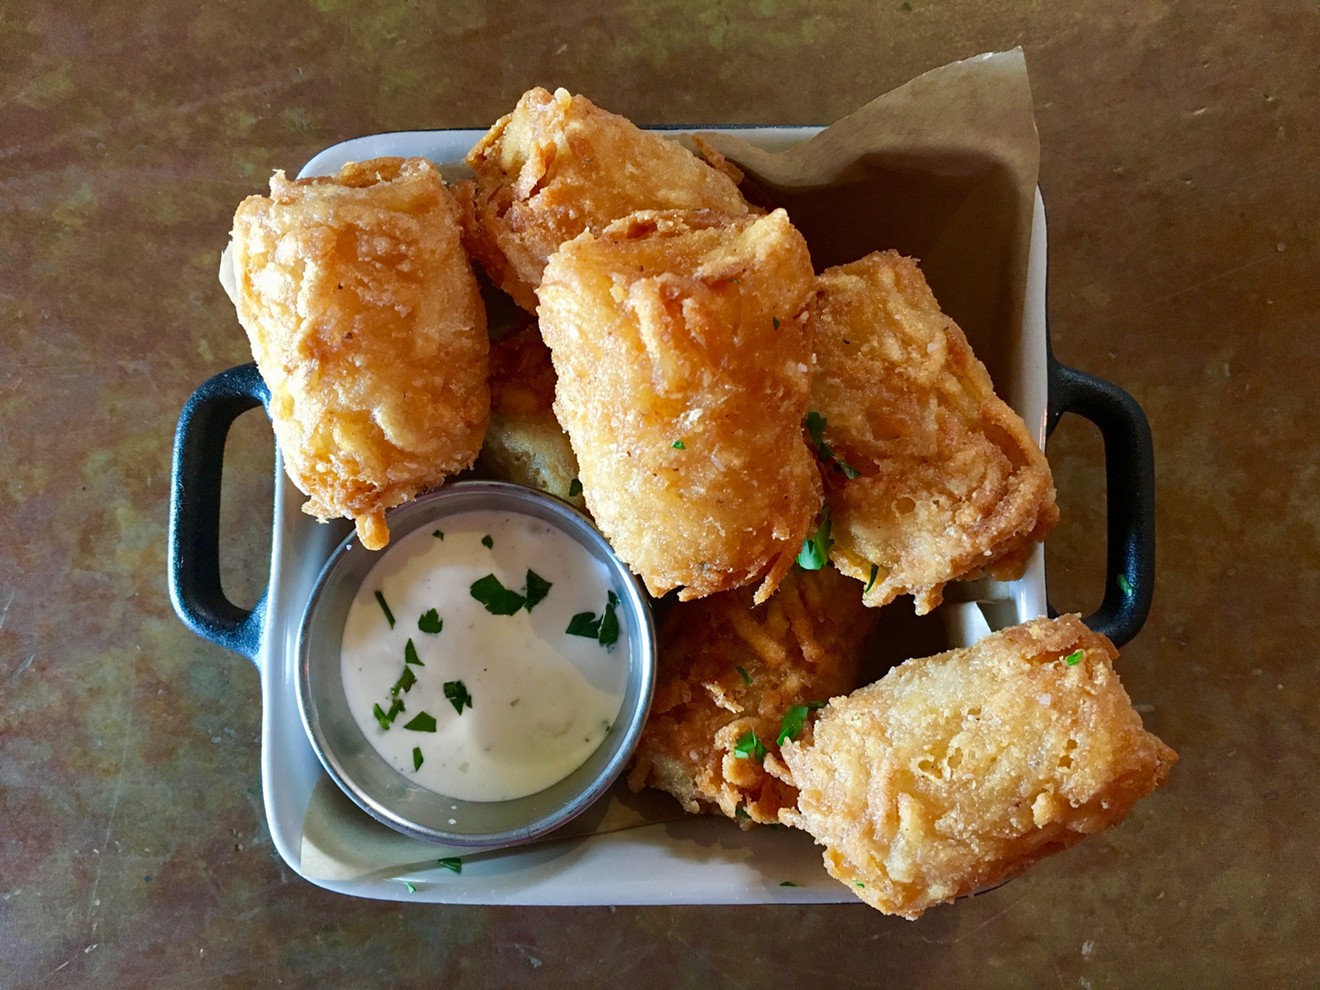 IdleRye's housemade tater tots are served with an oniony dipping sauce.